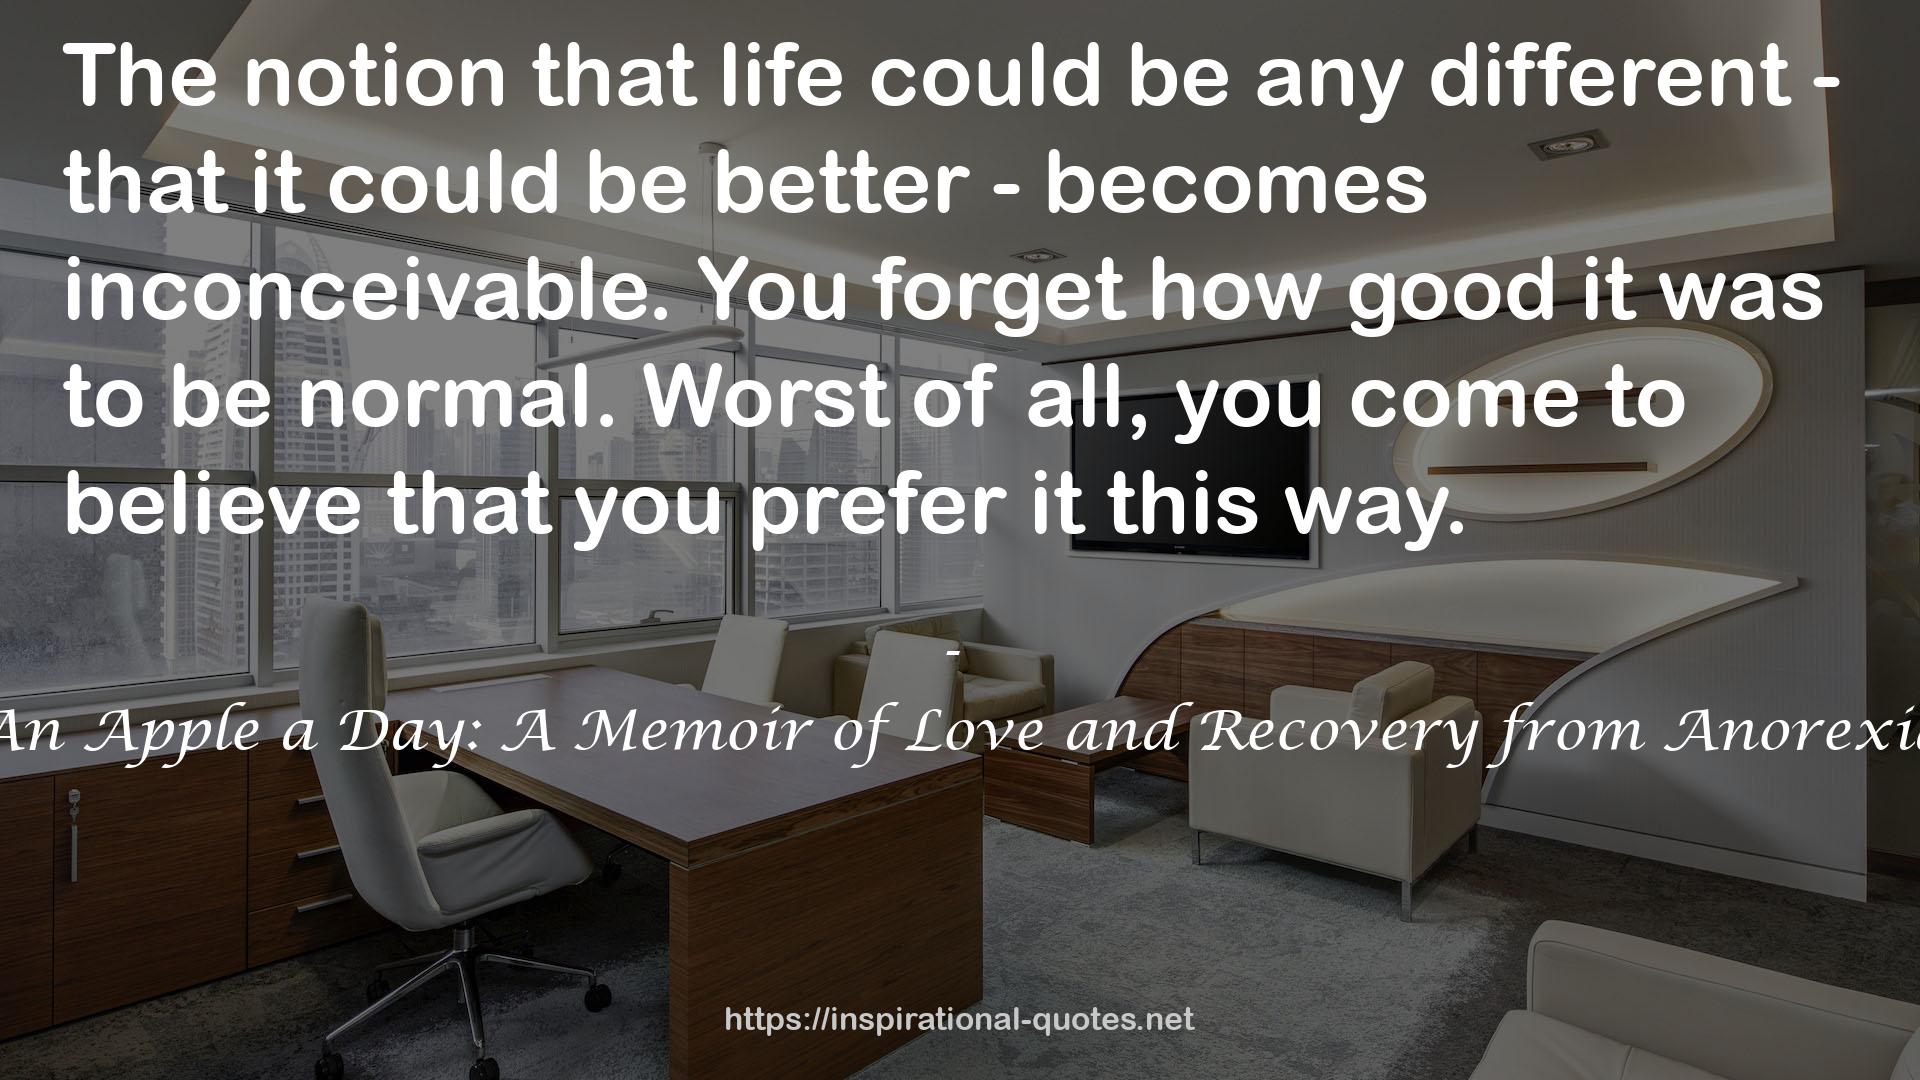 An Apple a Day: A Memoir of Love and Recovery from Anorexia QUOTES